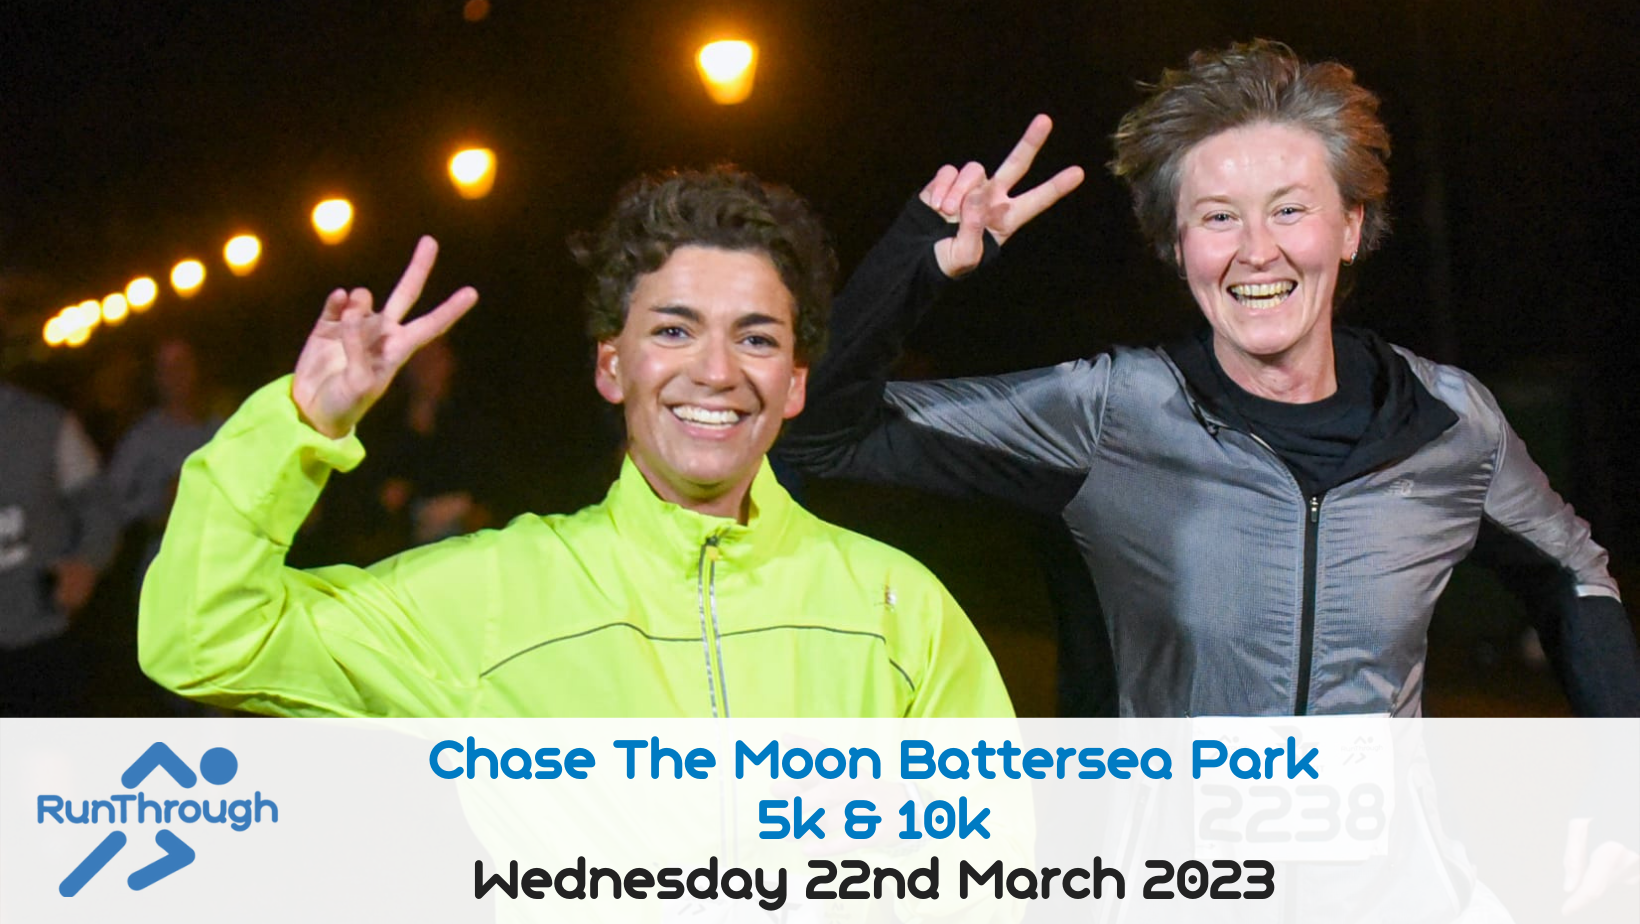 Image for RunThrough Battersea Park Chase The Moon 10k